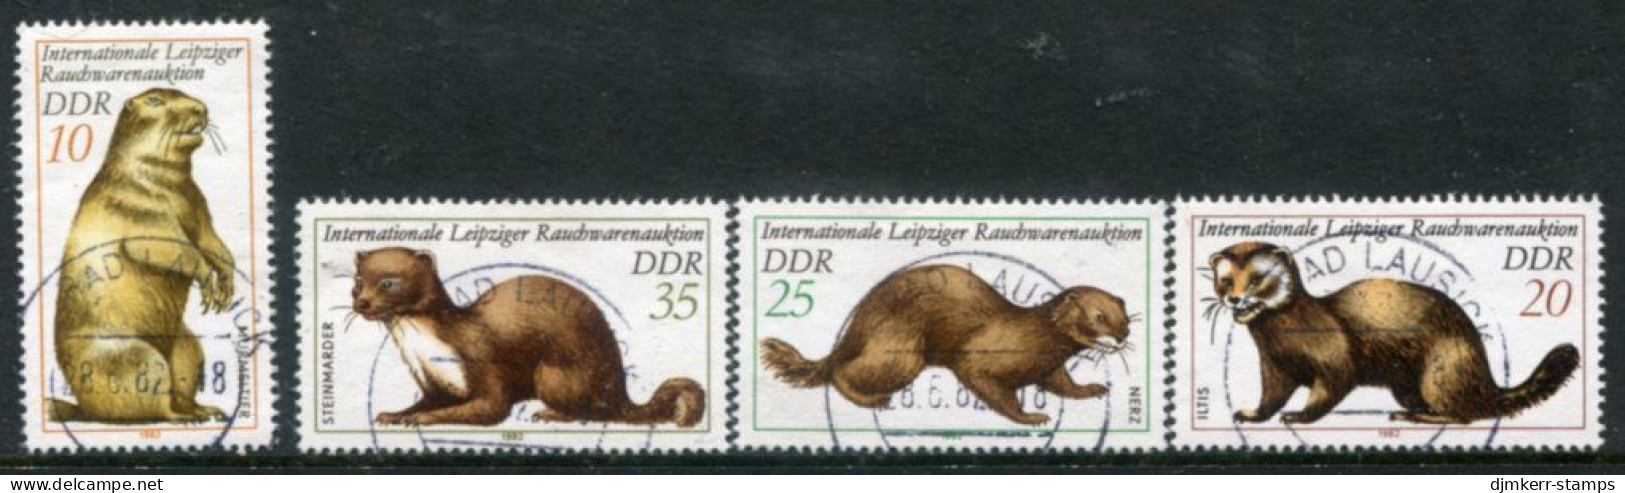 DDR 1982 International Fur Auction Used.  Michel 2677-80 - Used Stamps